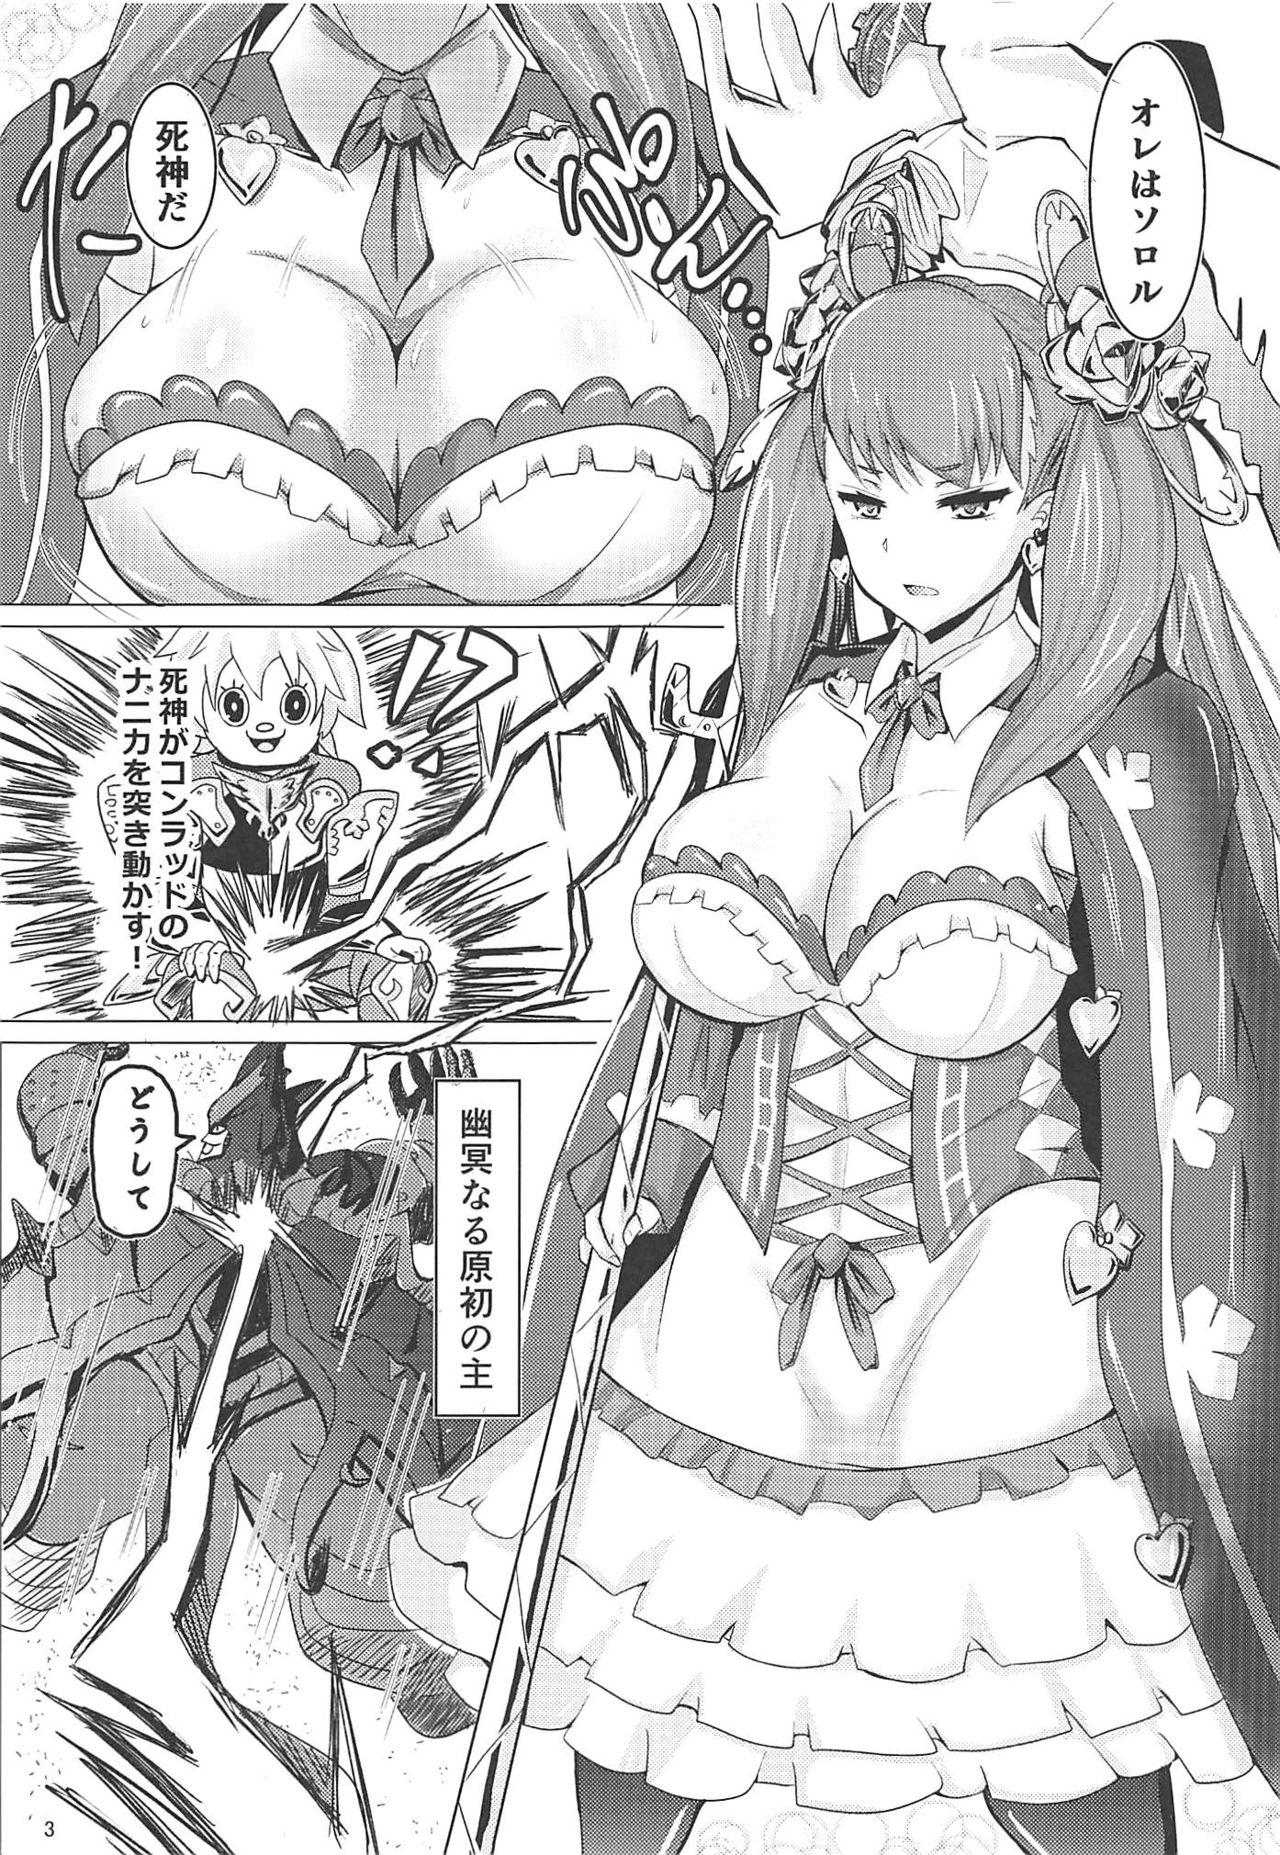 Perfect Pussy Death in General + C96 Omake Paper - Etrian odyssey Interacial - Page 2